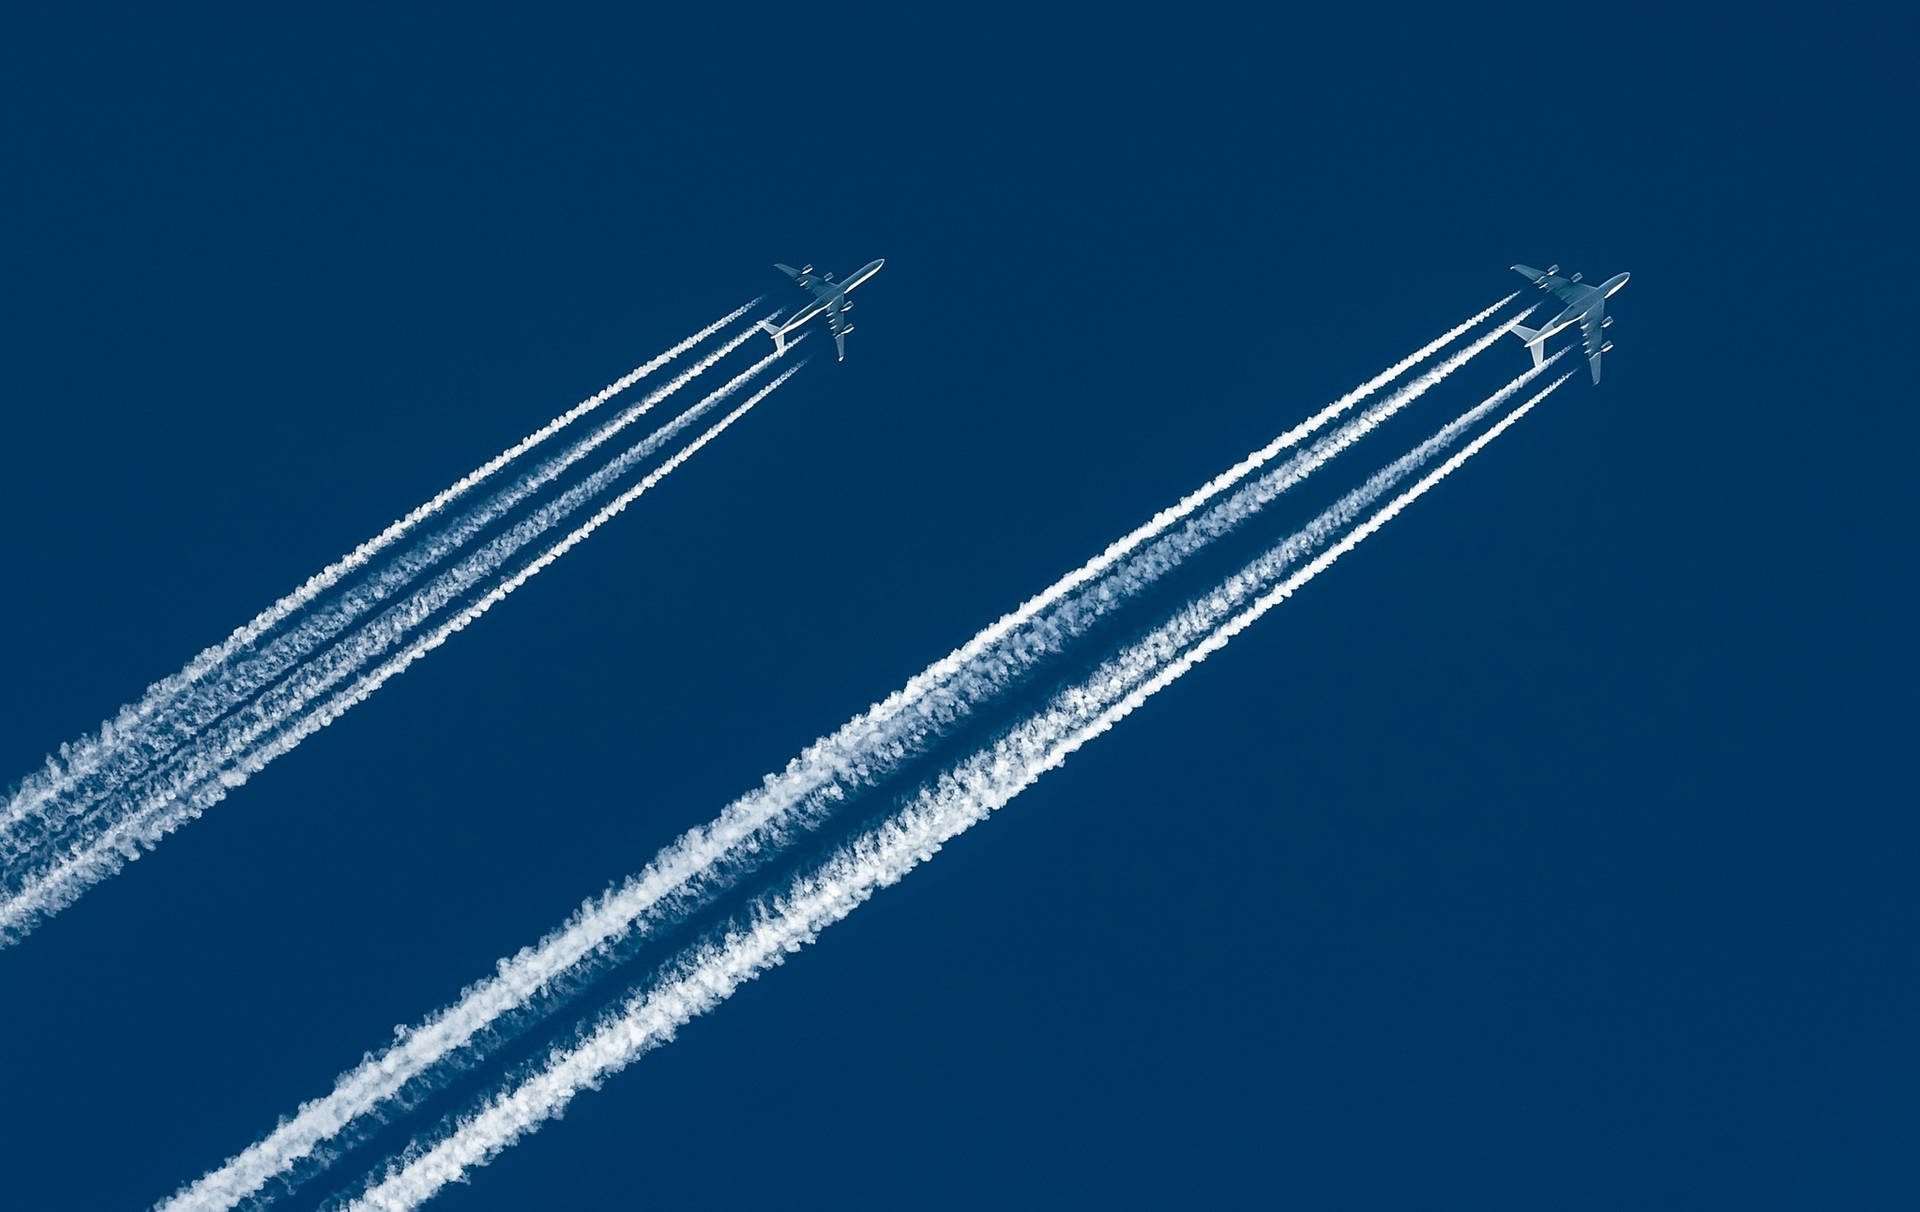 Two Hd Plane With Contrails Background